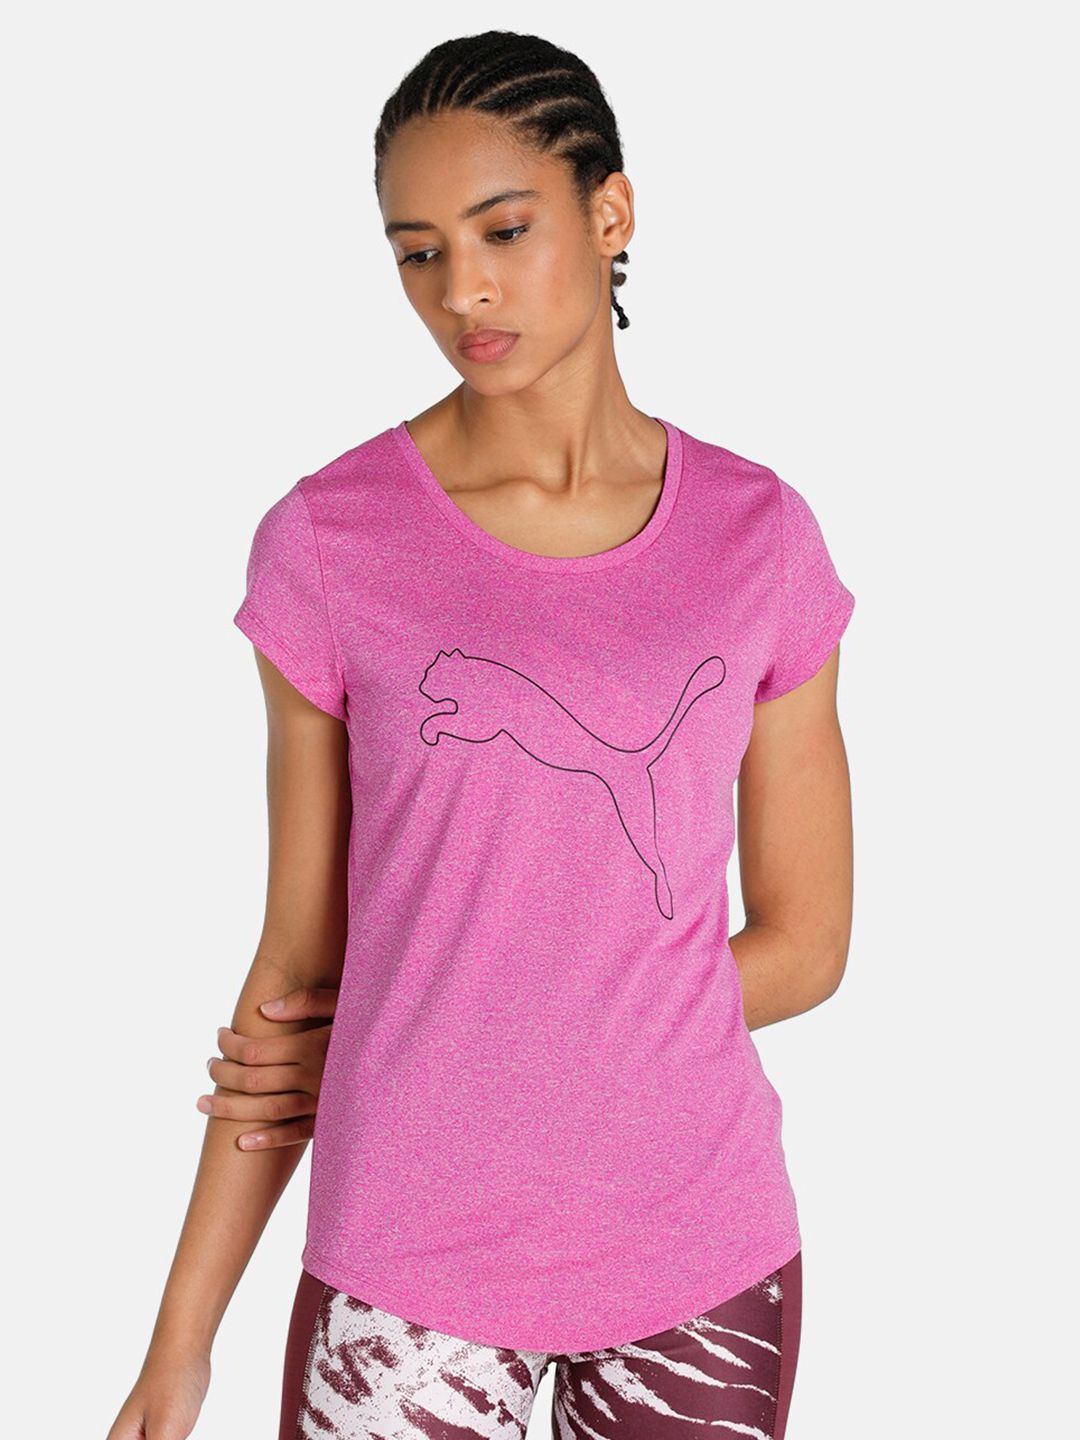 Puma Women Pink & Black Printed Performance Heather Regular Fit Training or Gym T-shirt Price in India